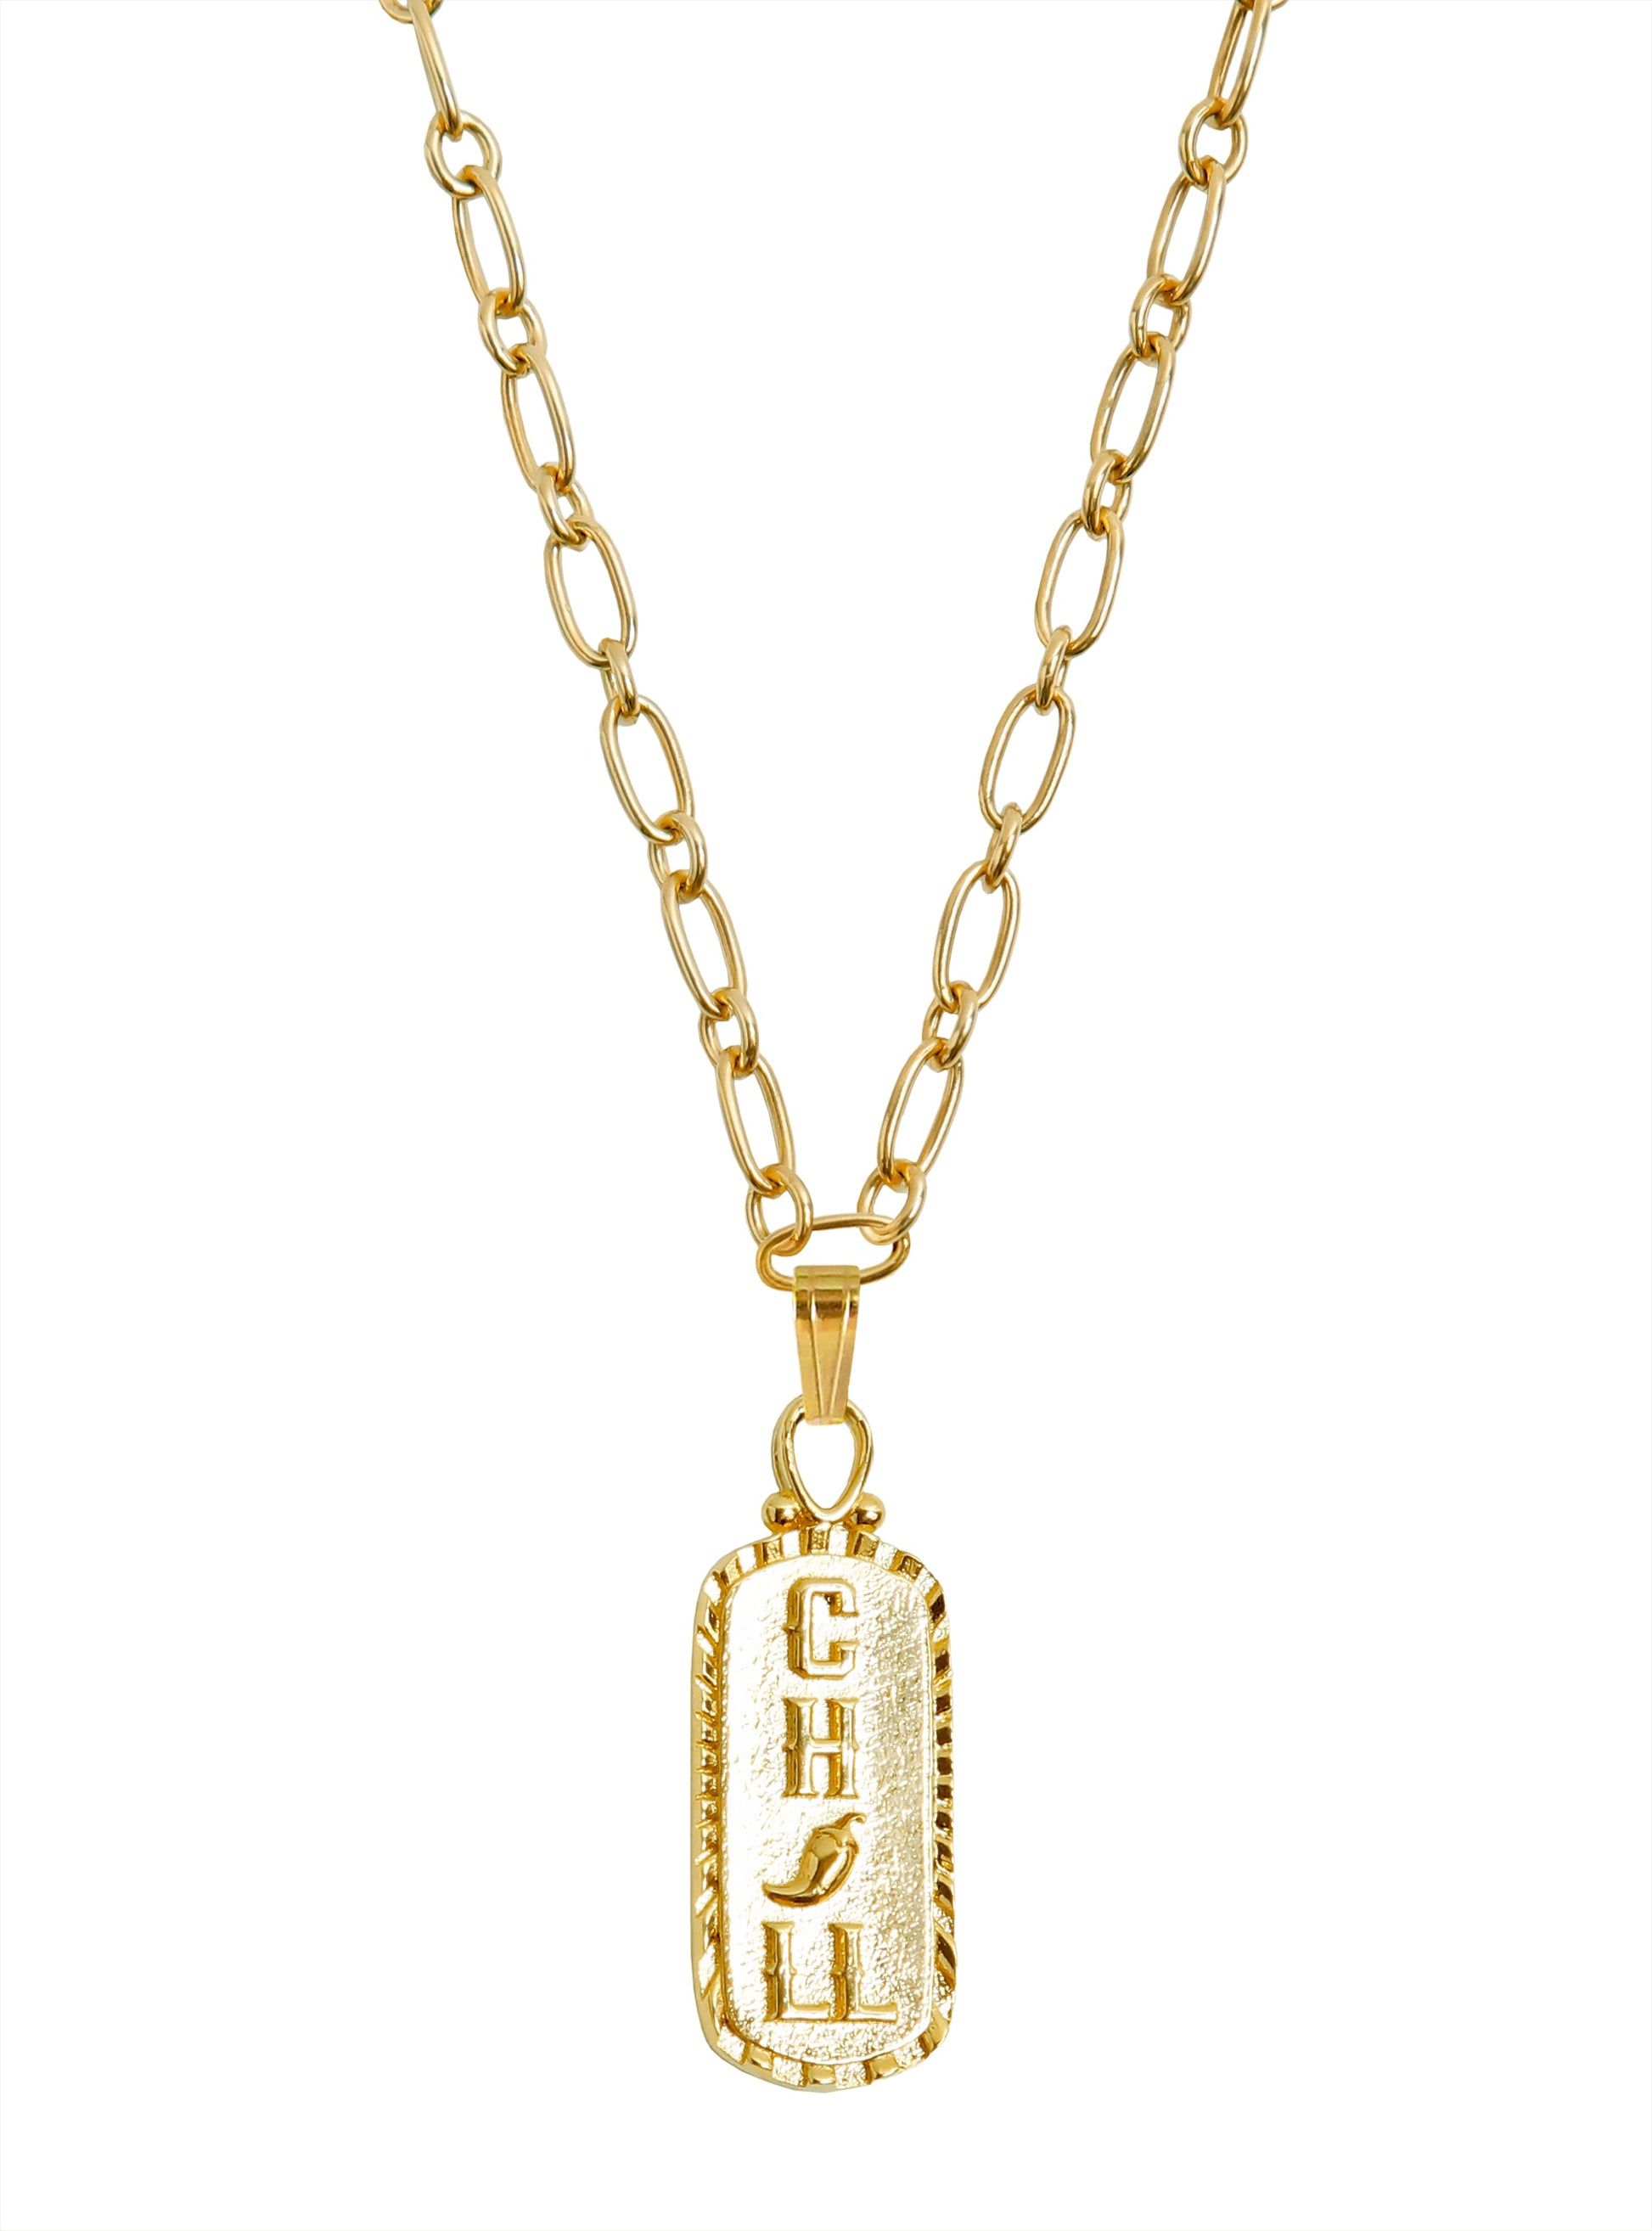 Chill Talisman Necklace, Gold plated Silver, Gender Neutral